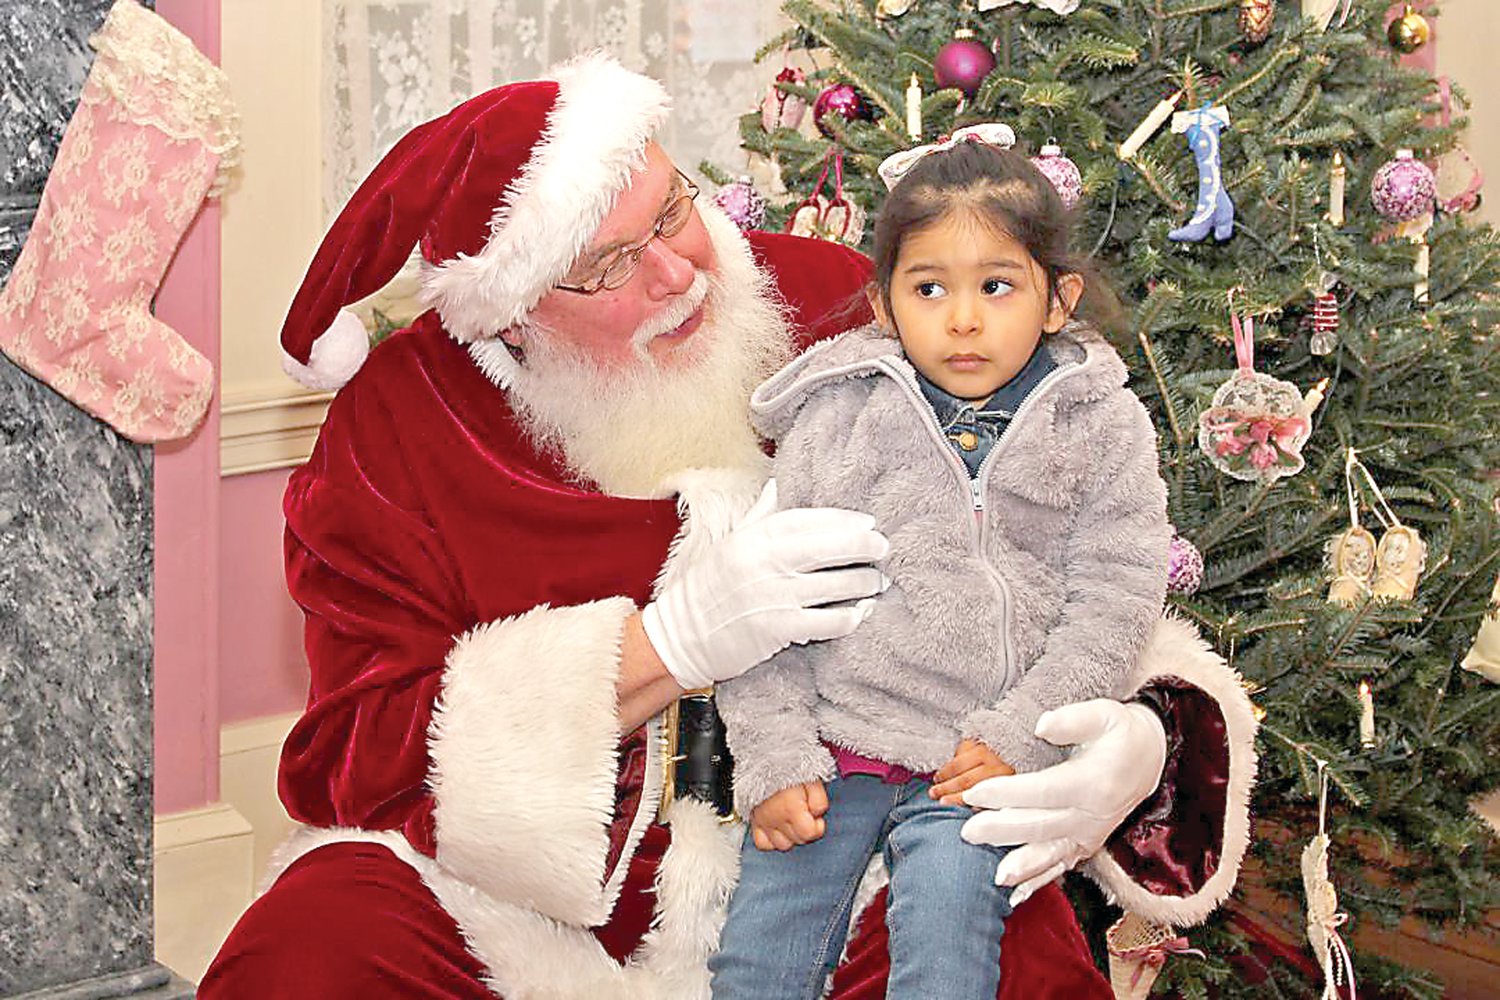 A young girl visits with Santa at Historic Craven Hall in Warminster.